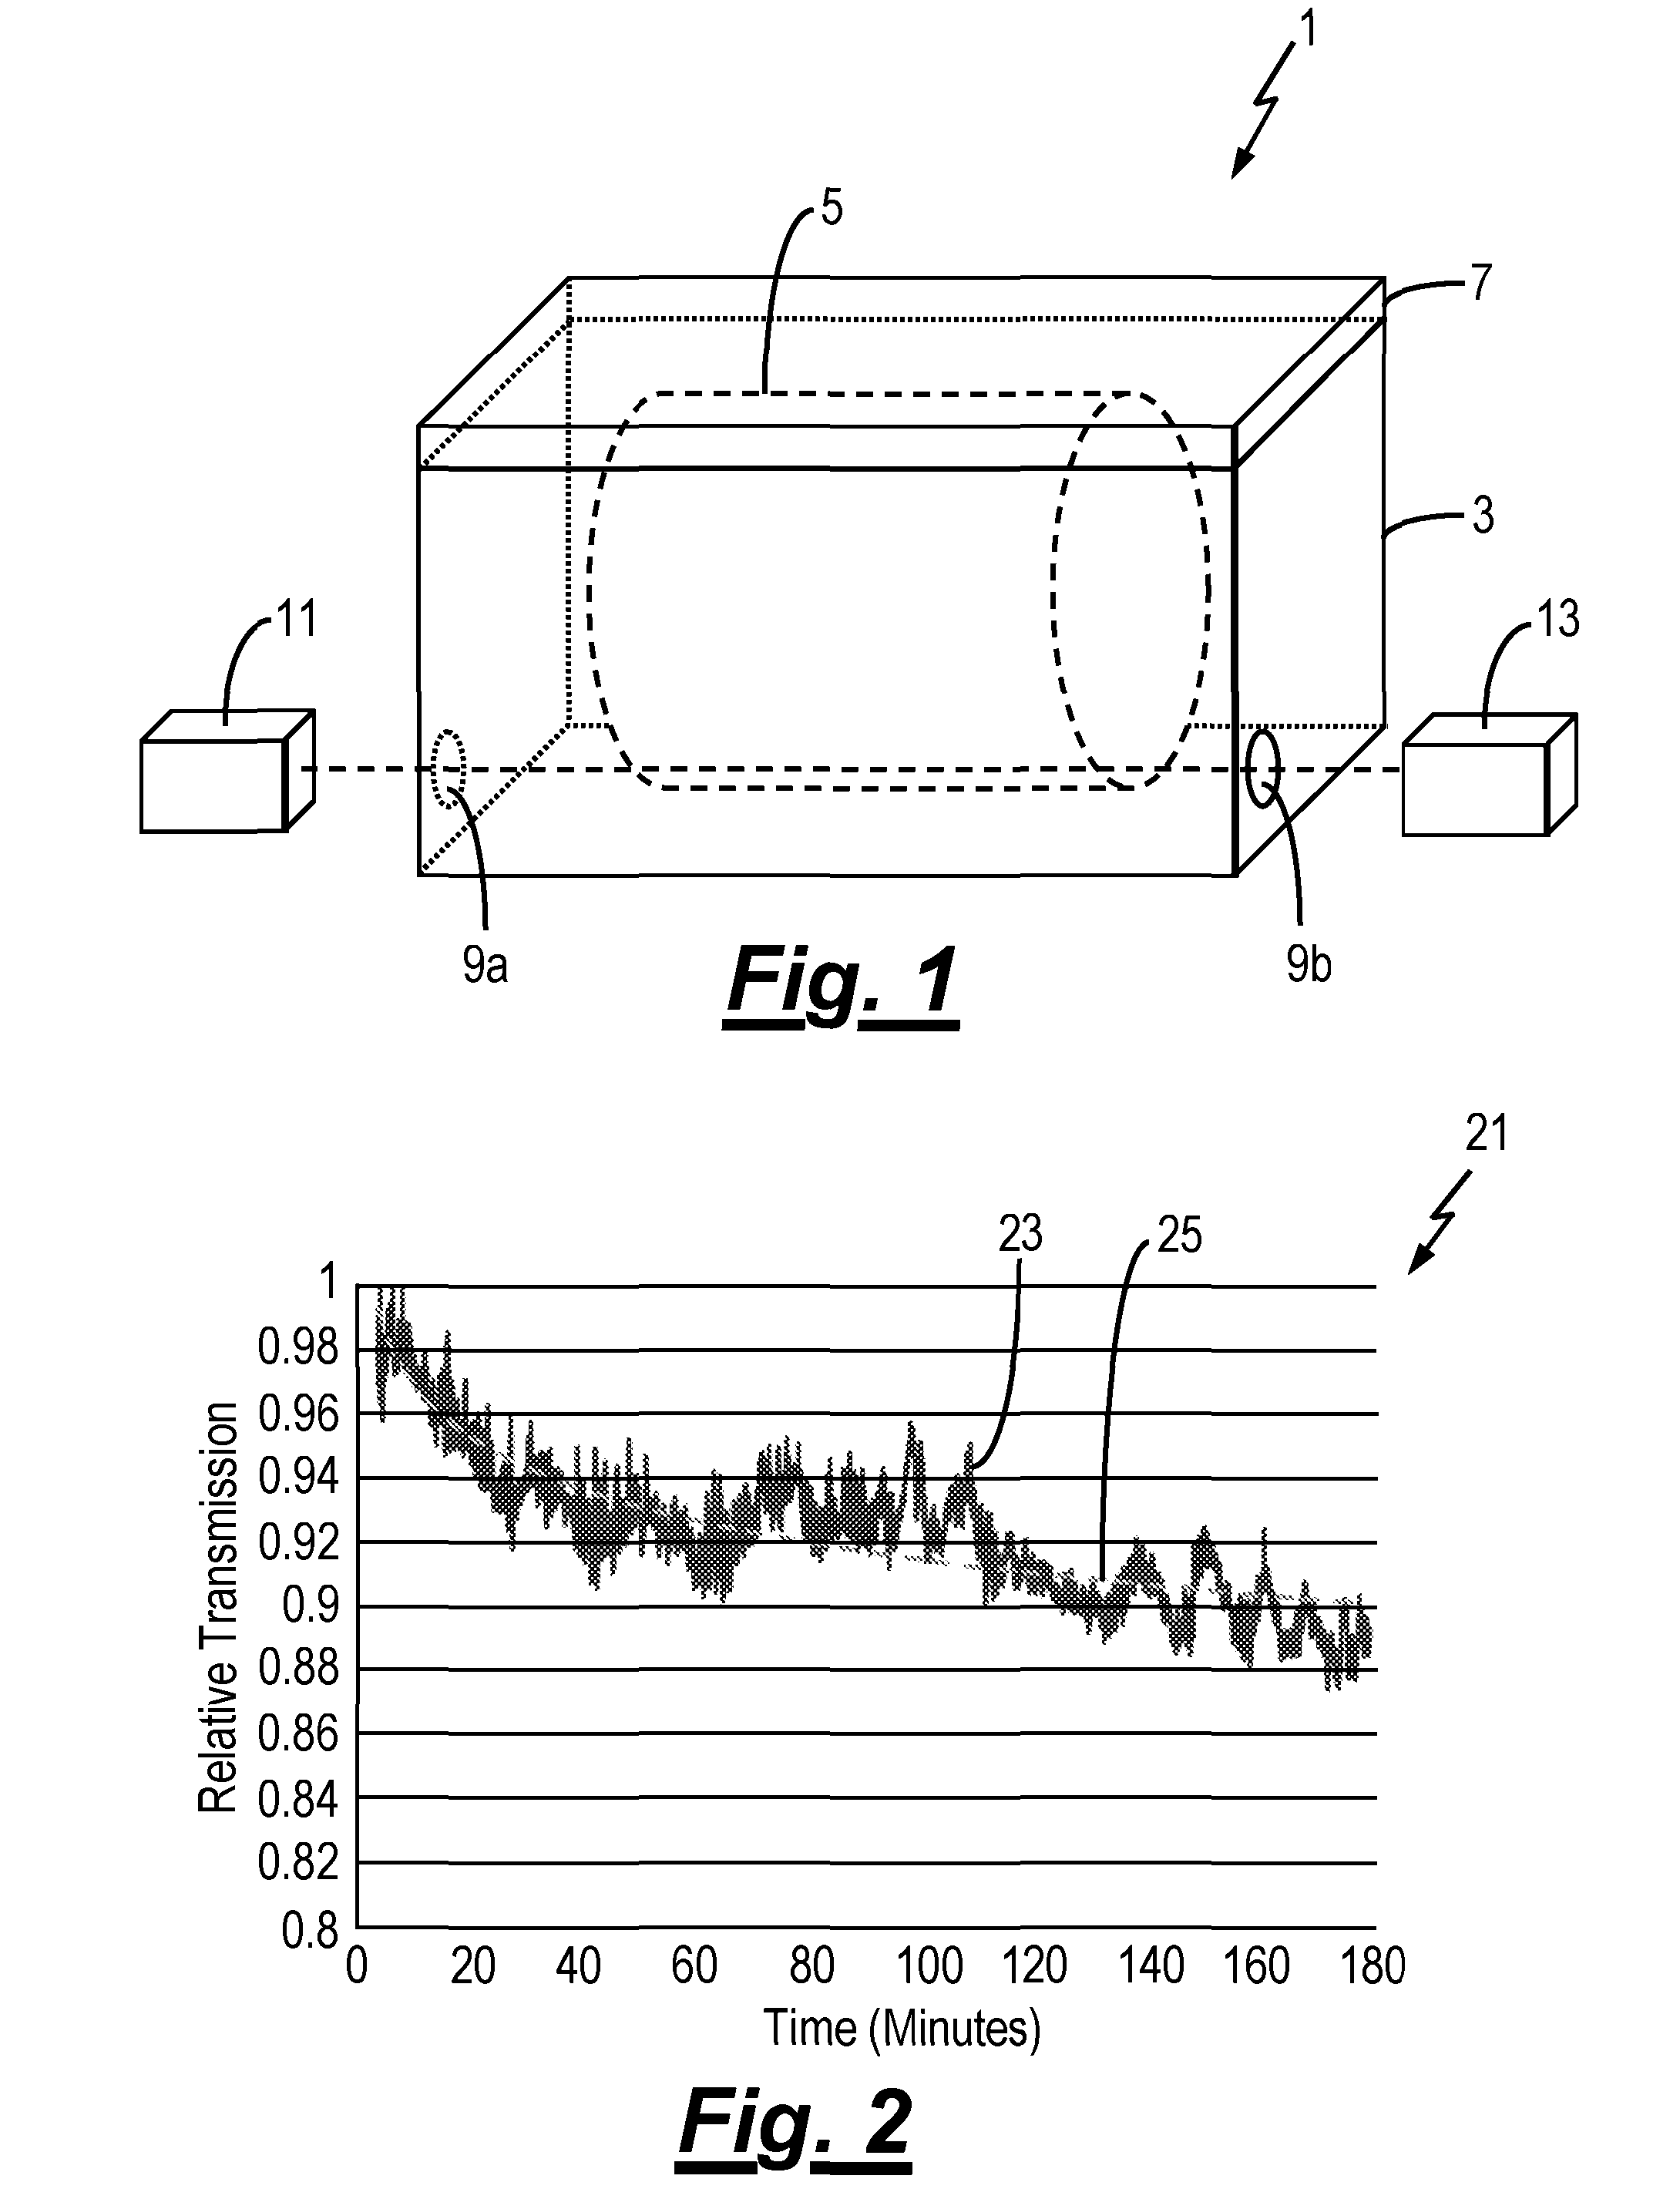 Maturation apparatus and methods